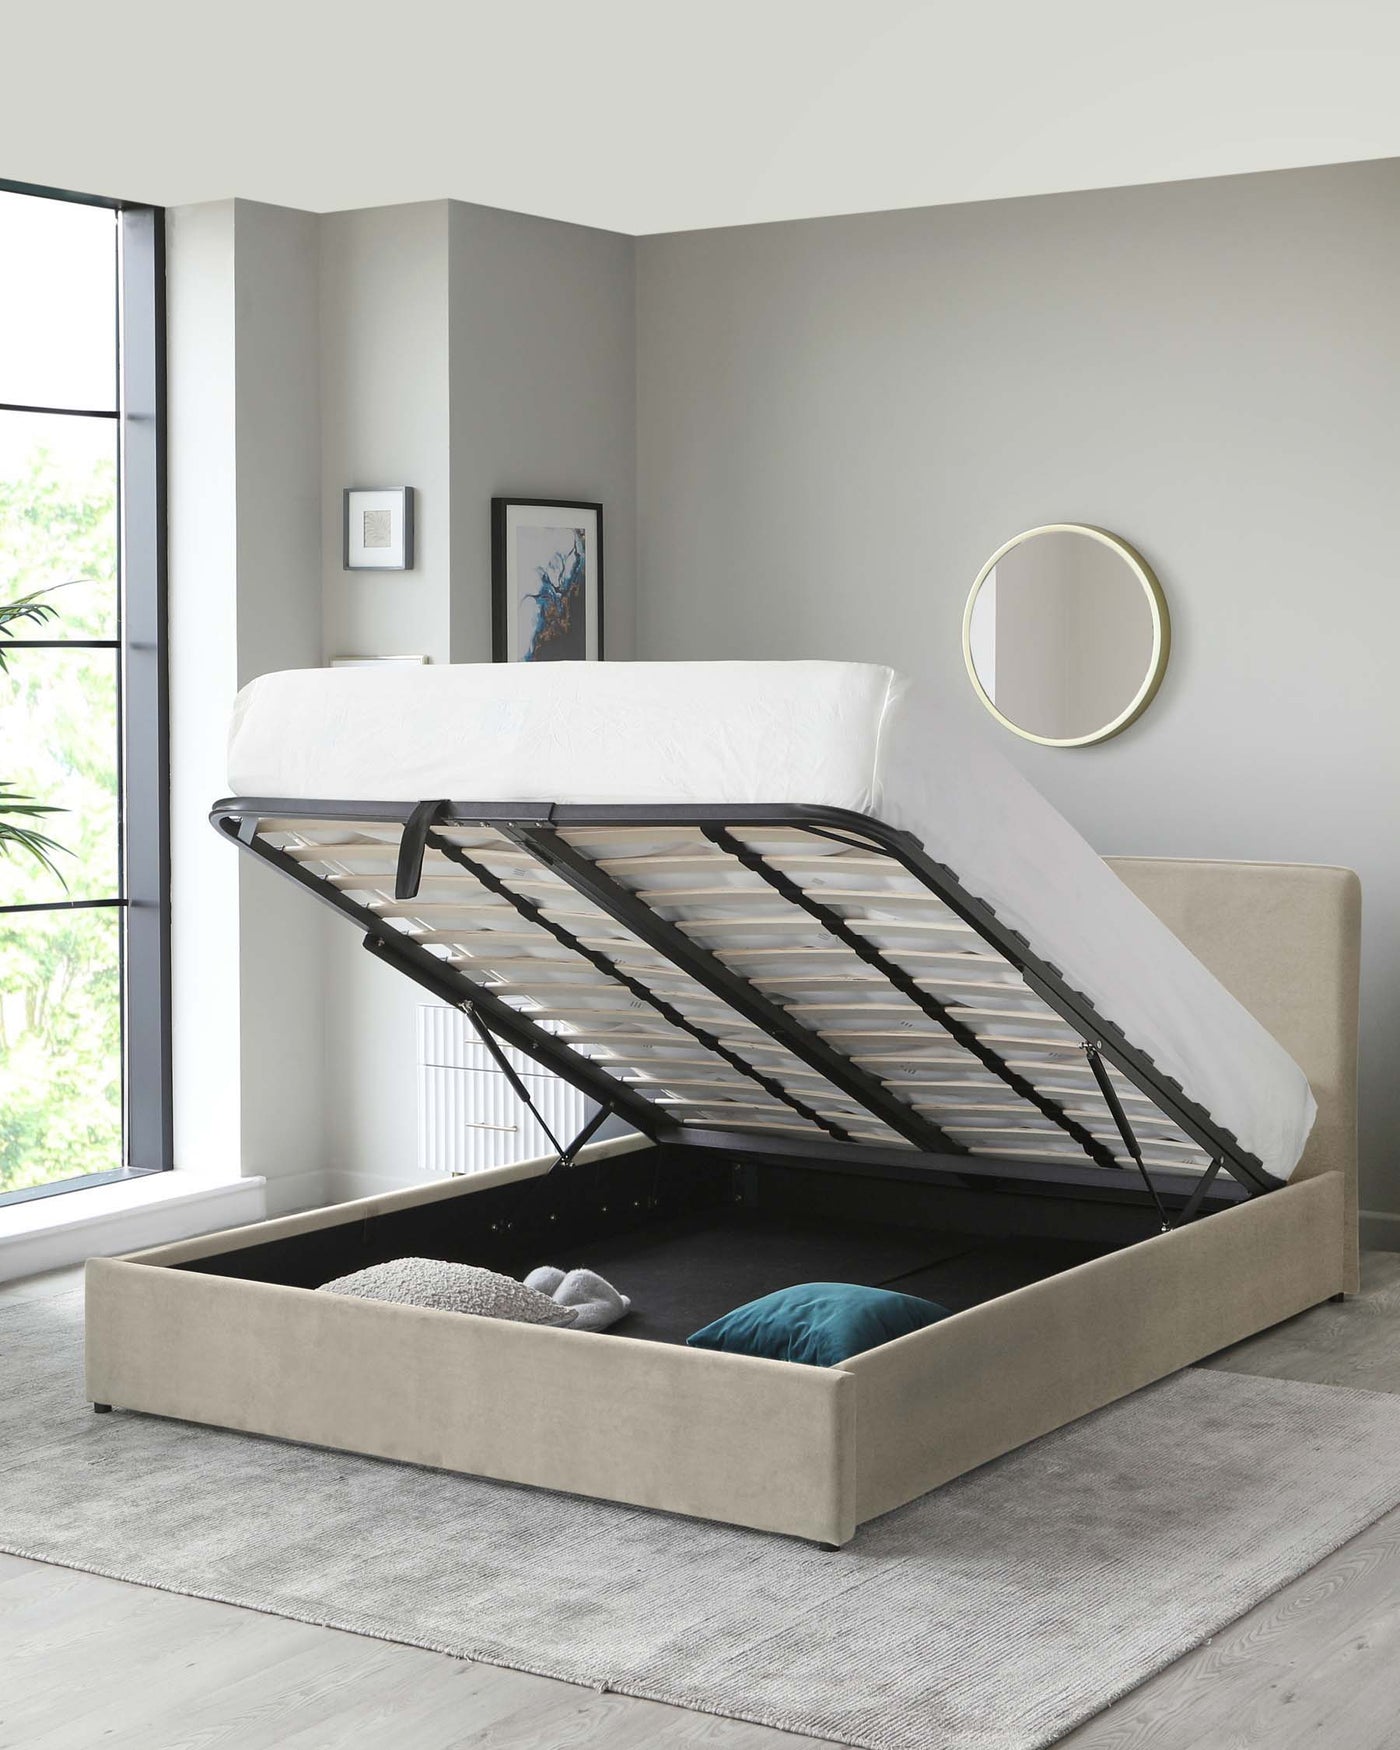 Modern beige upholstered storage bed with a lifted mattress frame revealing under-bed storage space containing pillows and blankets, situated on a light grey area rug. A round mirror is mounted on the wall above the bed.